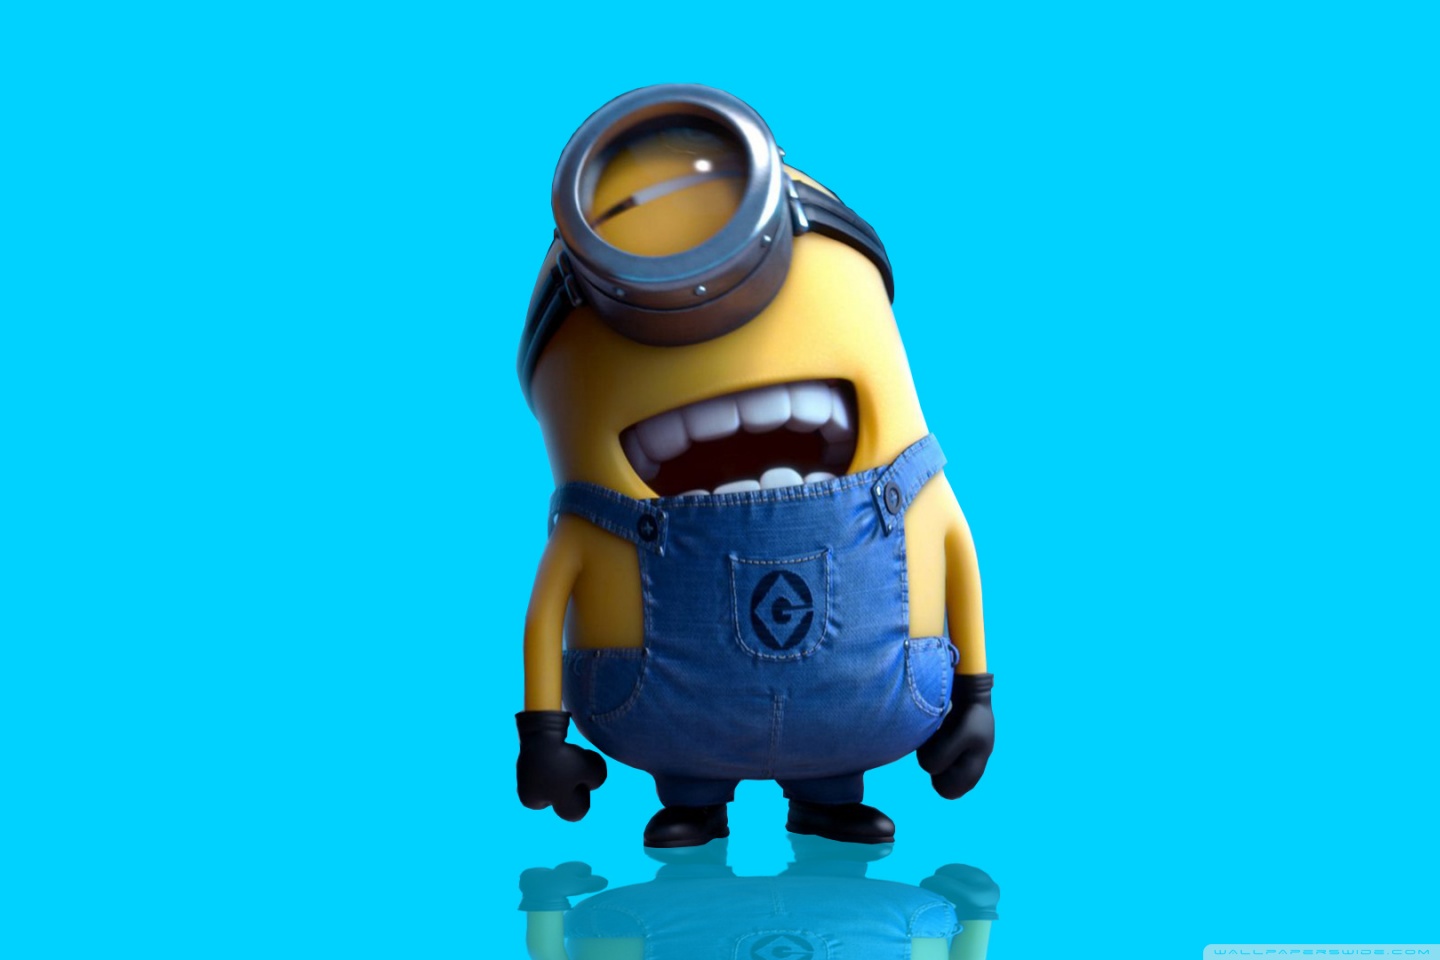 Download wallpapers Carl 4k blue neon lights Carl the Minion Minions  The Rise of Gru fan art Despicable Me Minions Carl Minions for desktop  free Pictures for desktop free